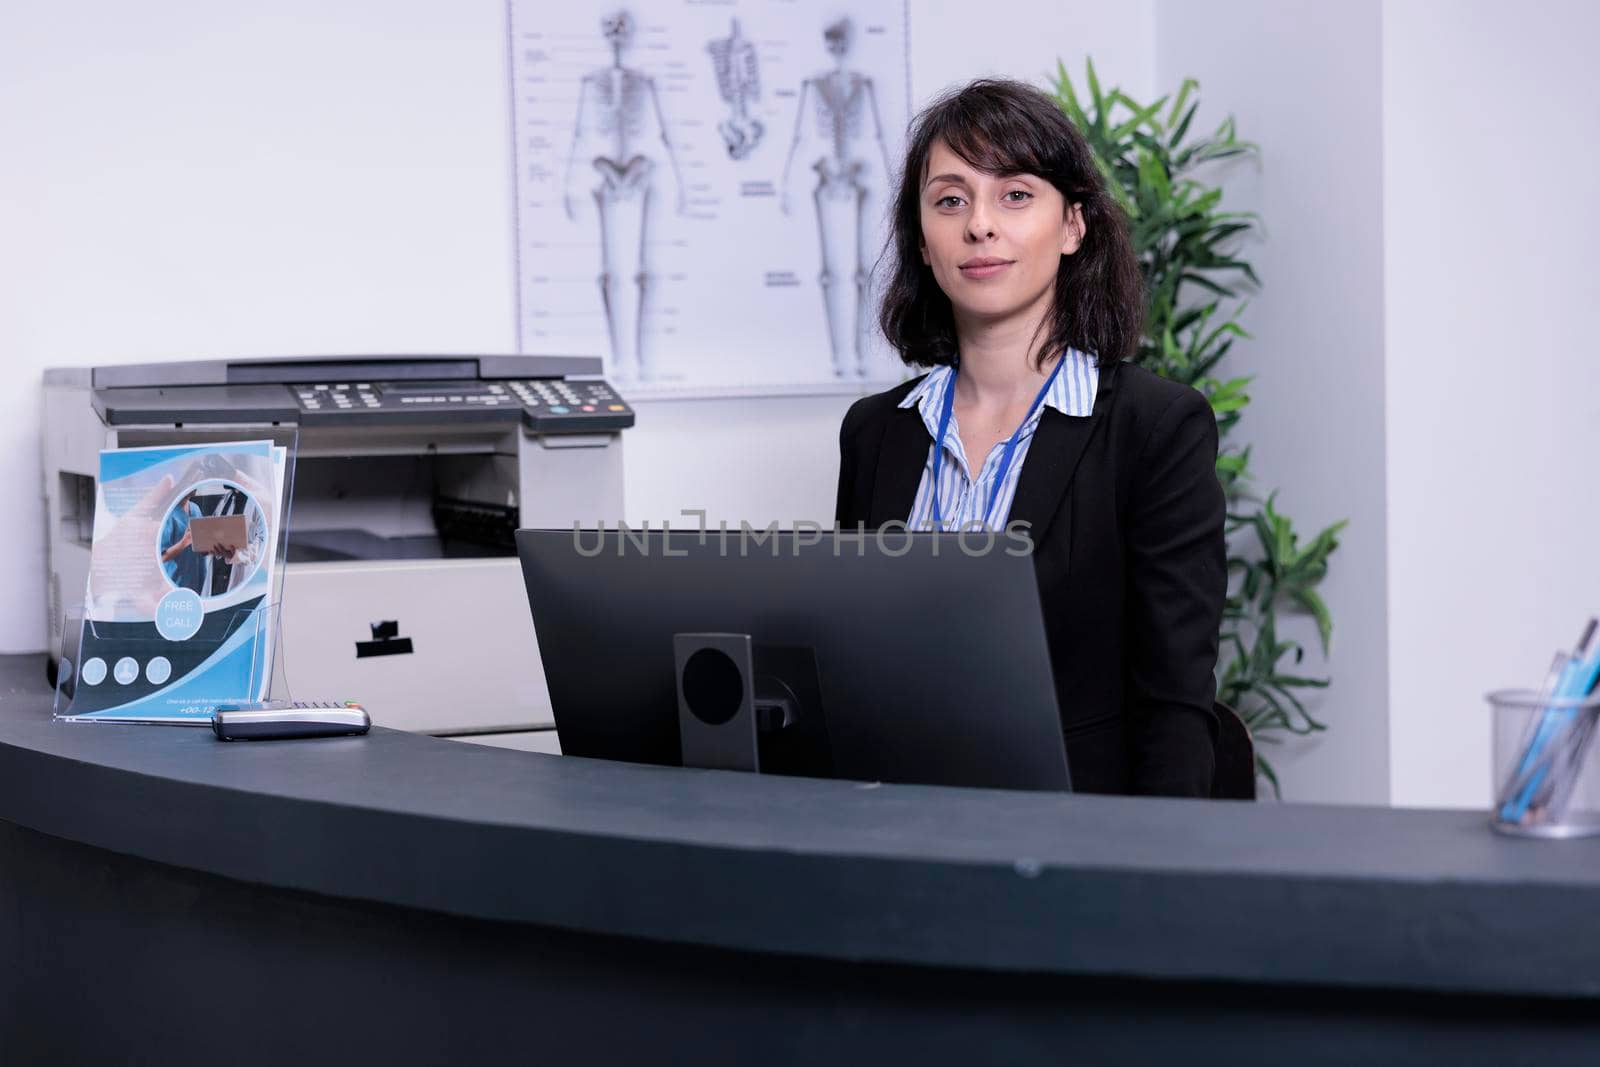 Portrait of smiling hospital receptionist standing at front desk waiting for appointments in private hospital. Professional healthcare worker greeting patients in private practice clinic lobby.